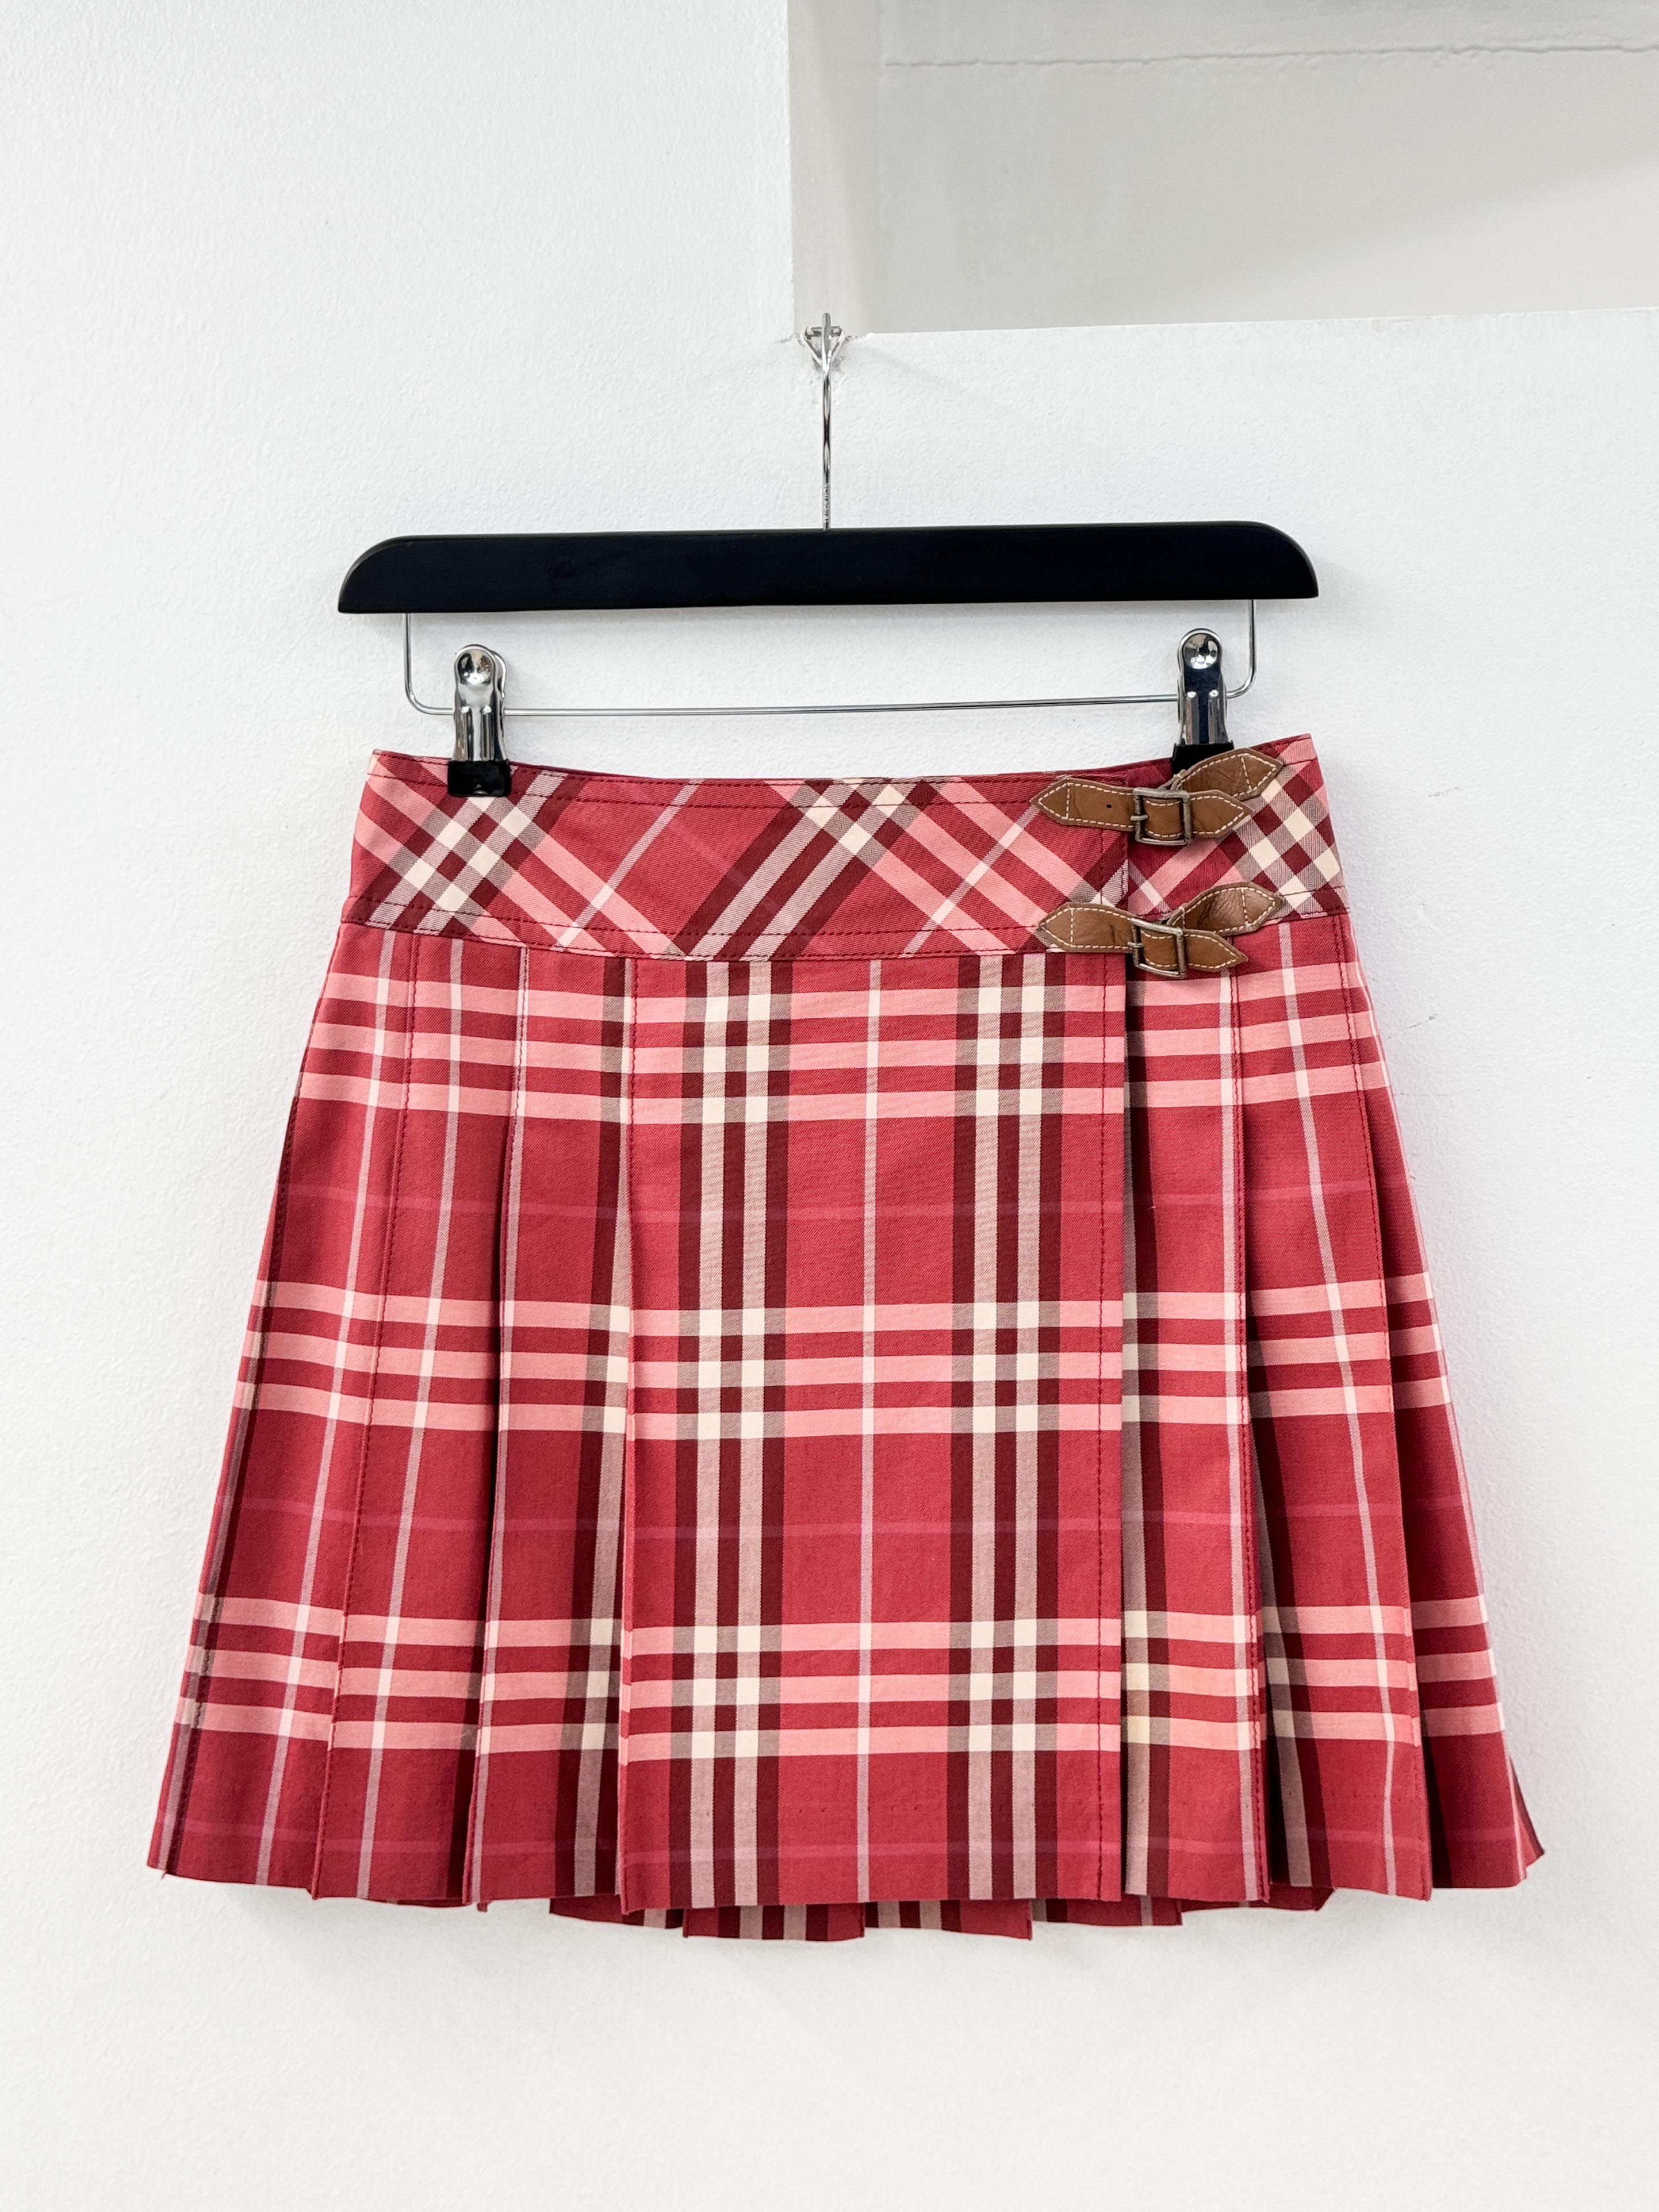 Burberry pink skirts 28inch